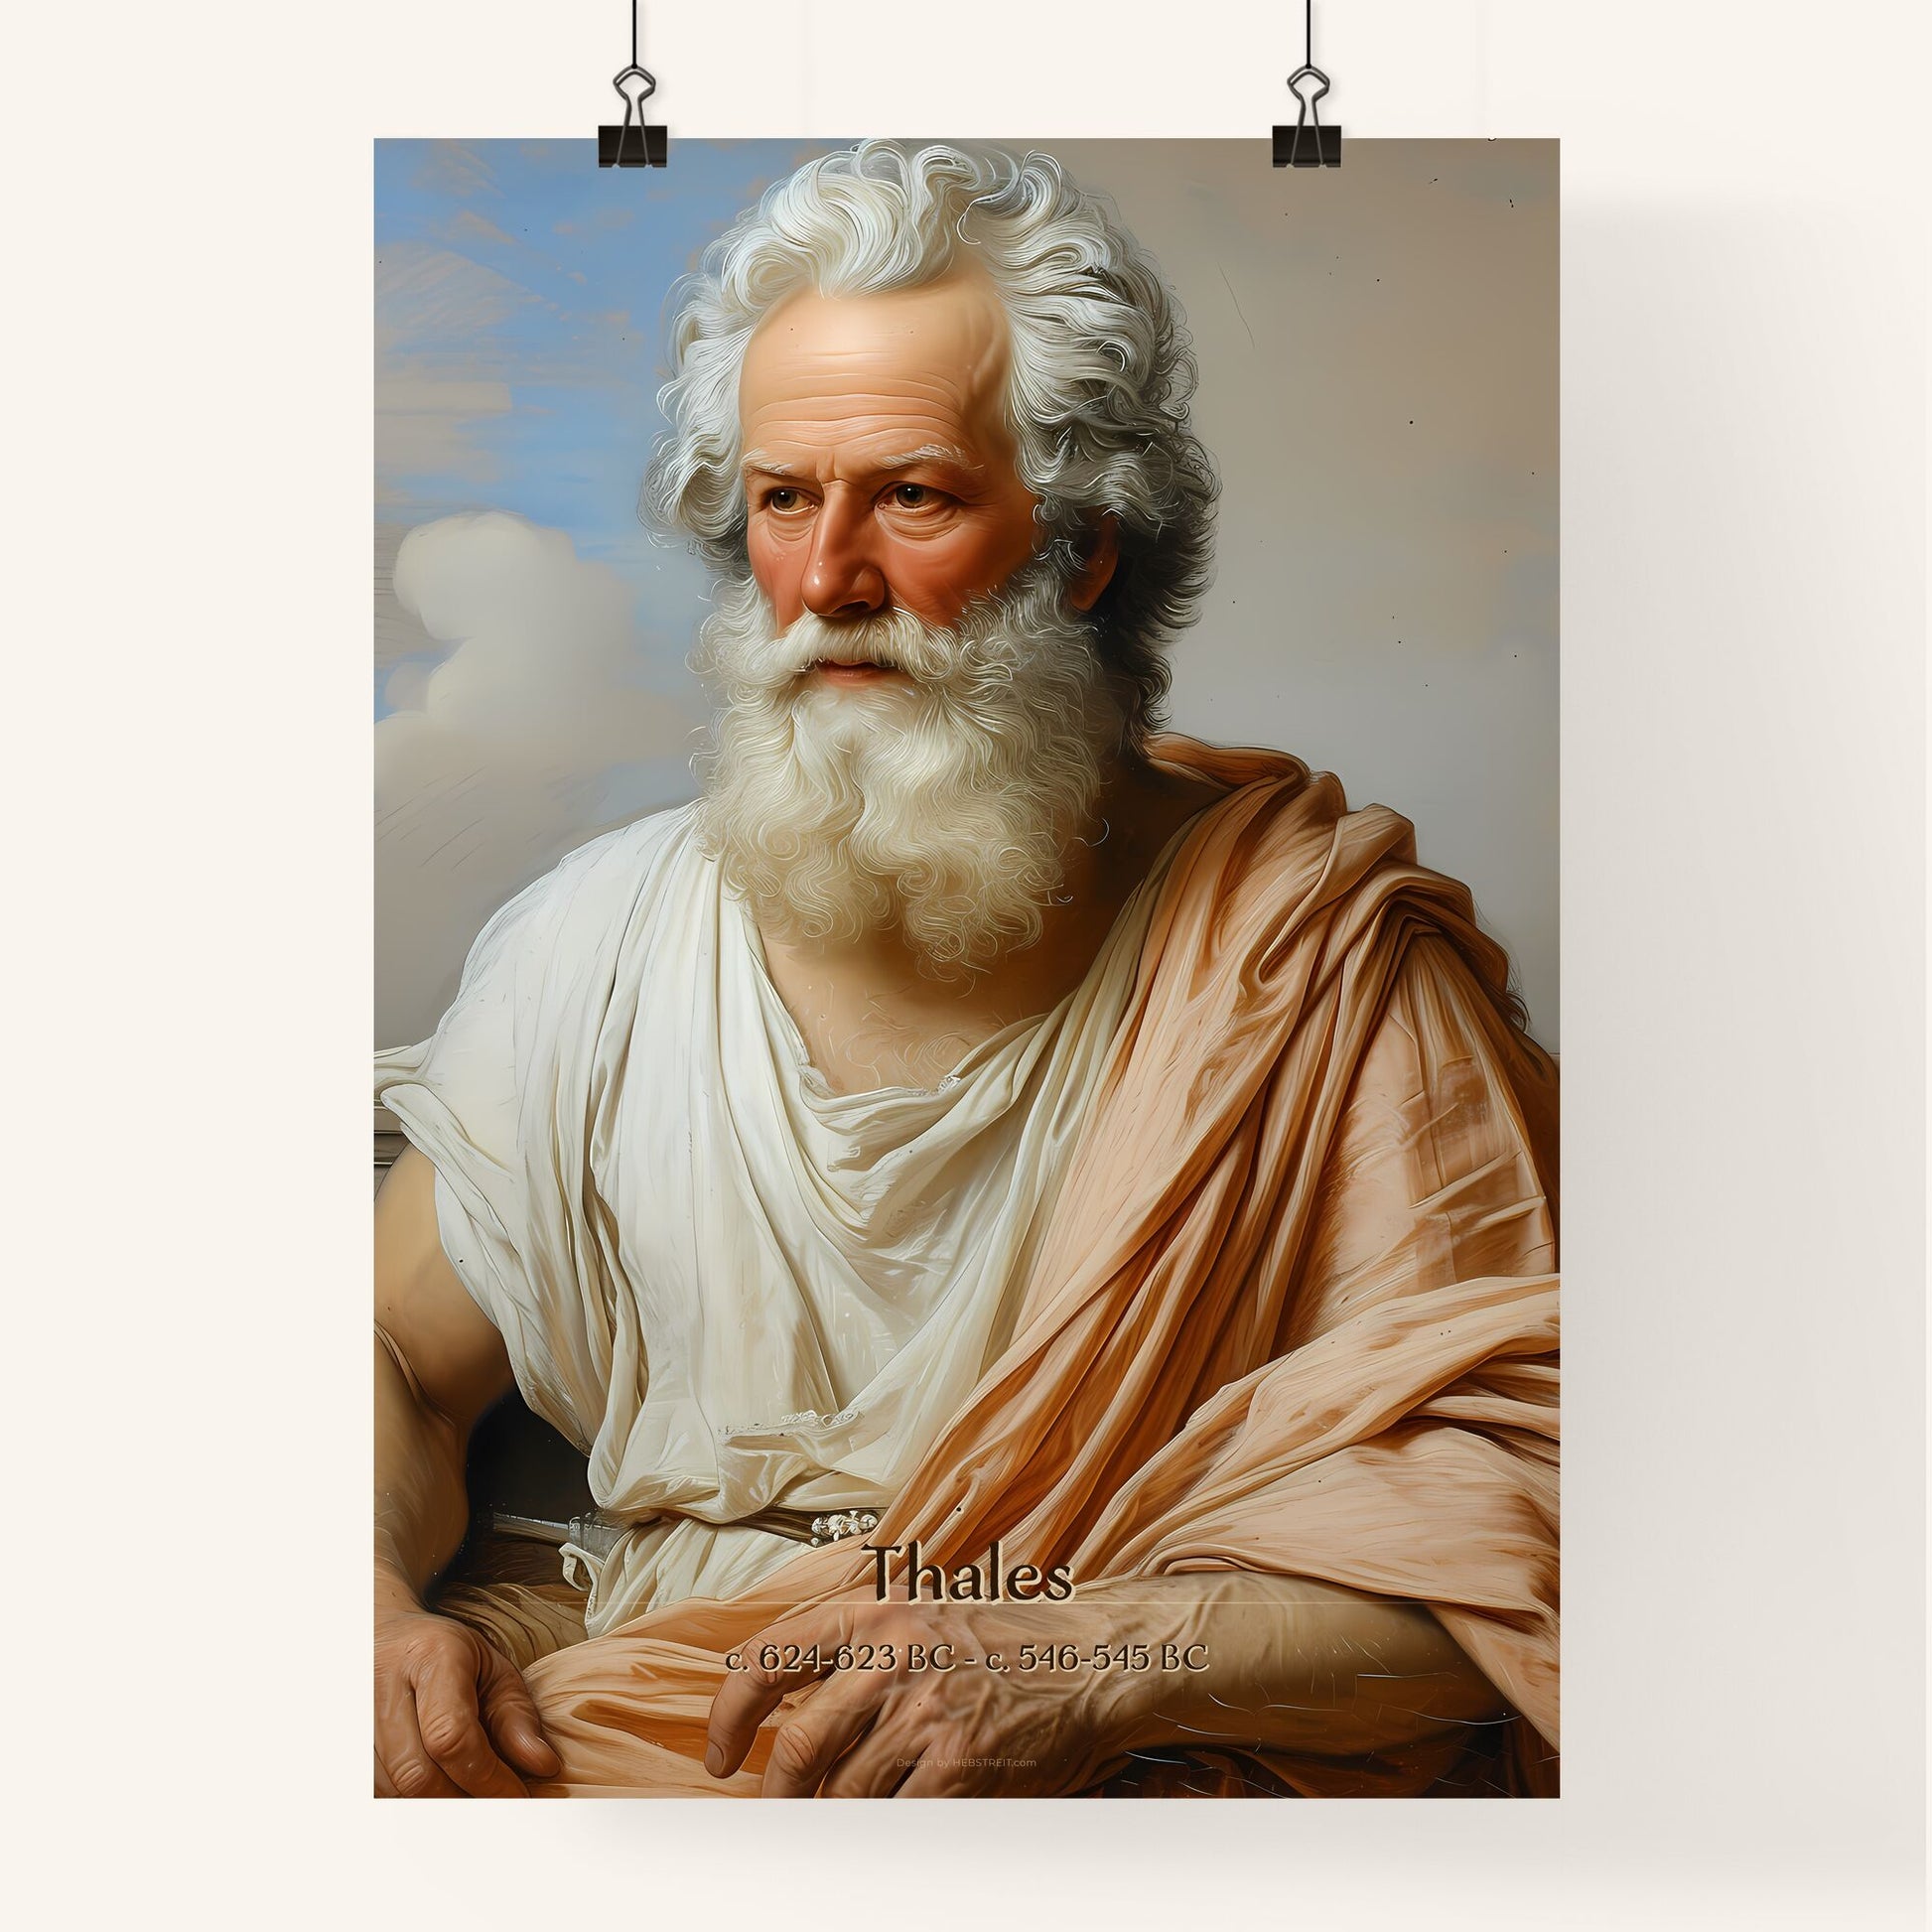 Thales, c. 624-623 BC - c. 546-545 BC, A Poster of a man with a white beard Default Title